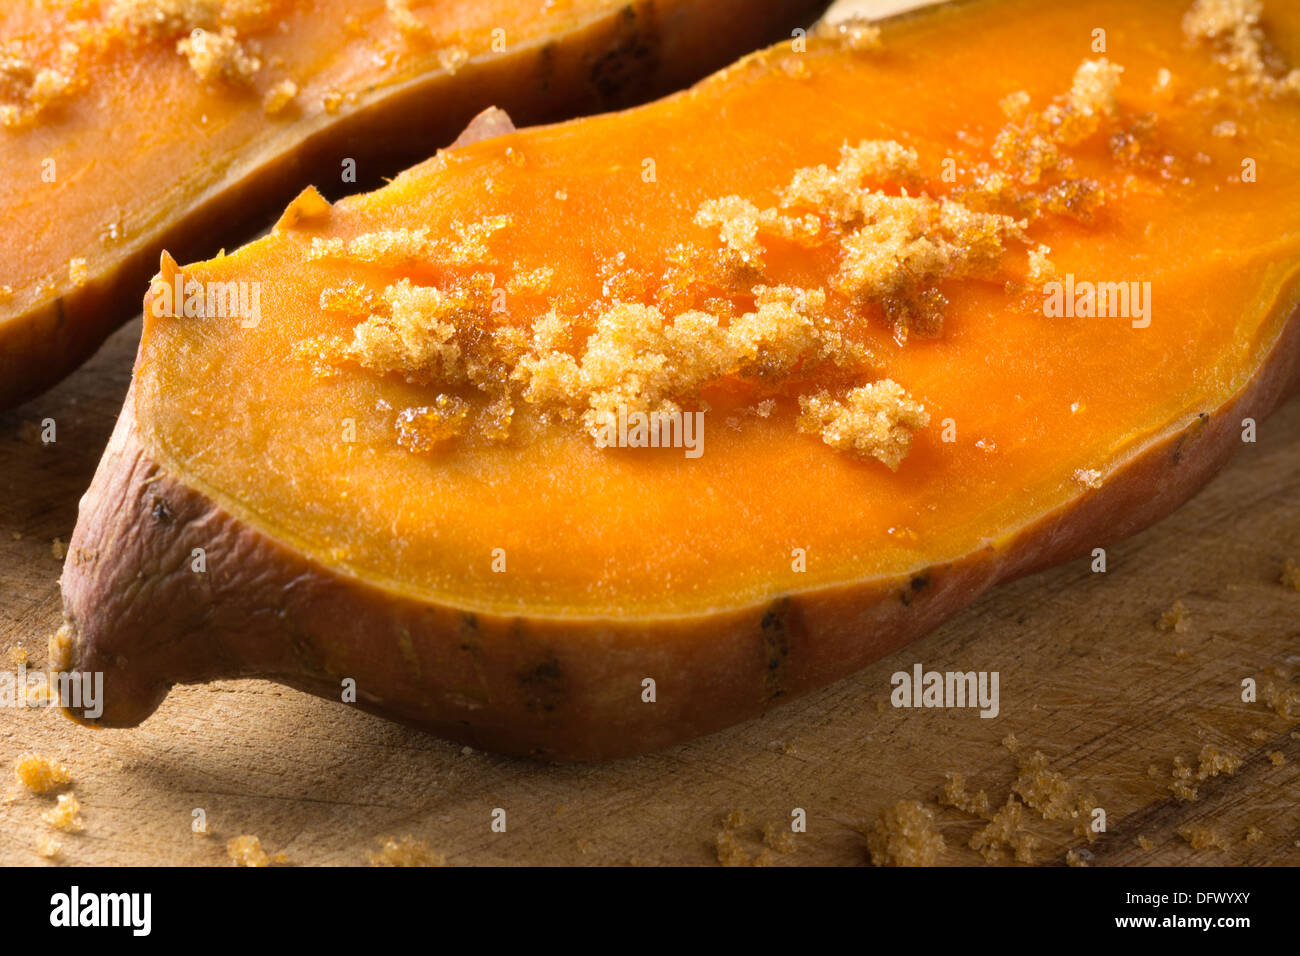 Two halves of cooked sweet potato with brown sugar Stock Photo